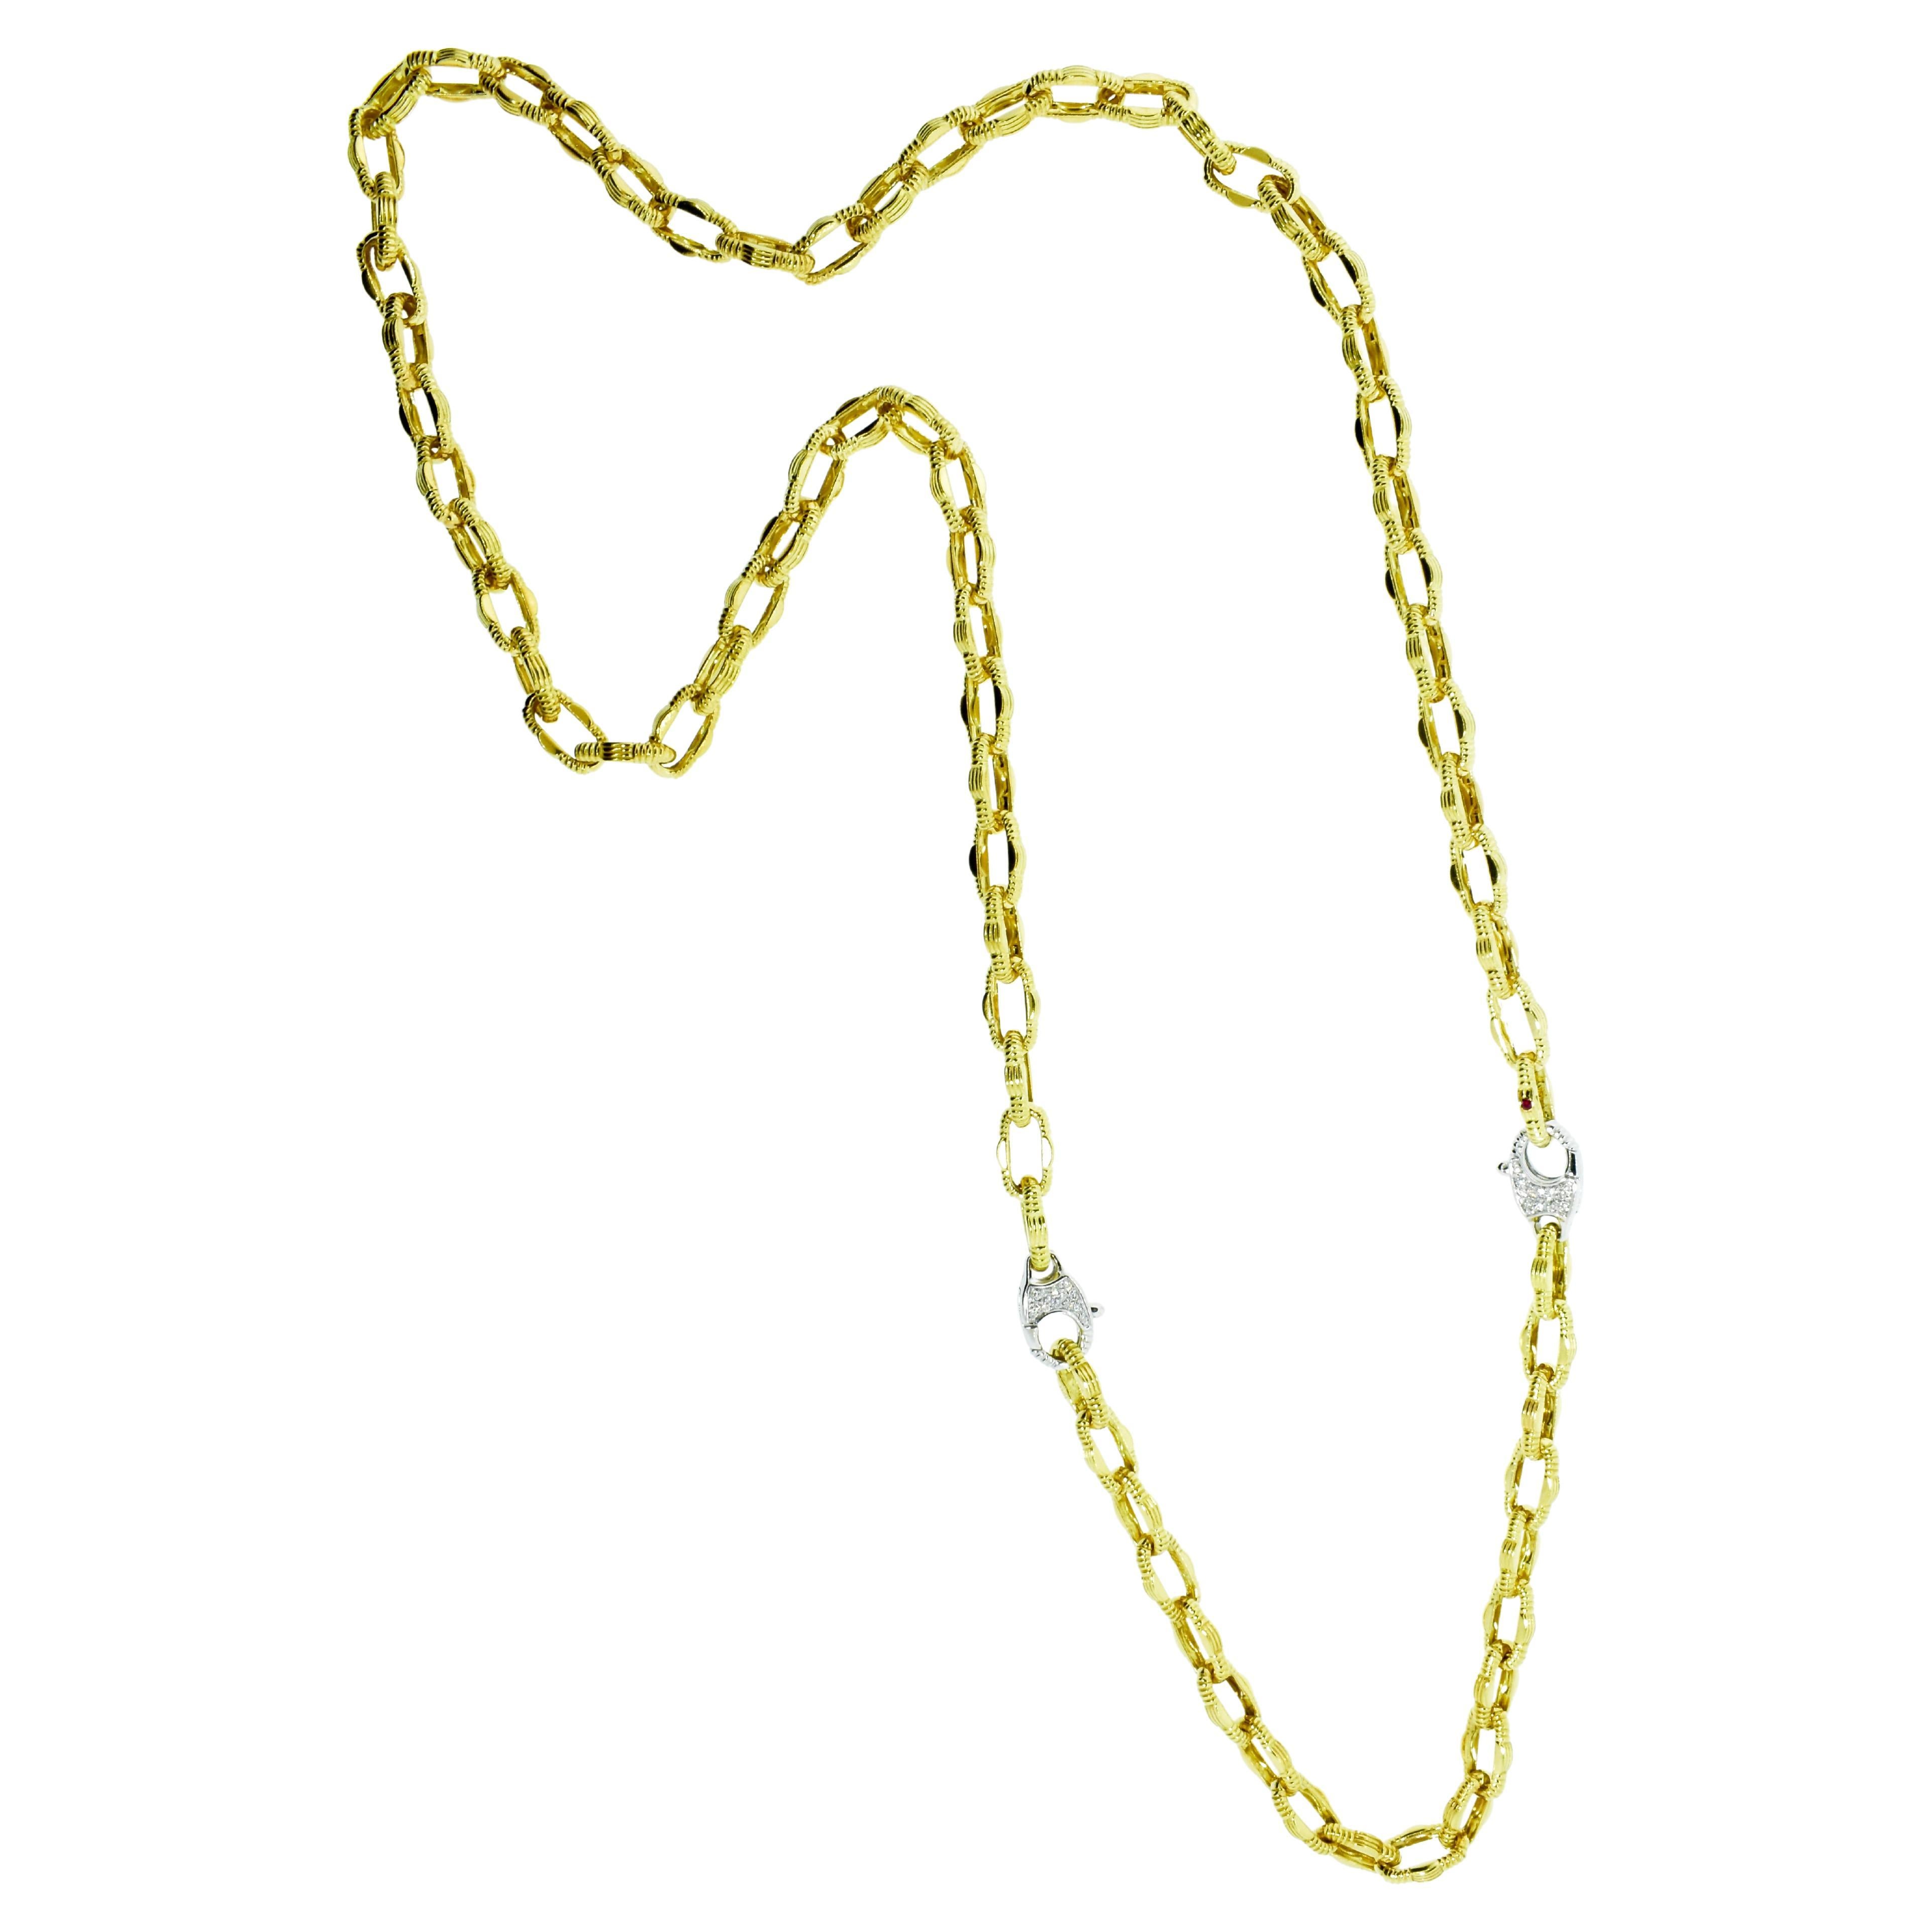 Roberto Coin 18K long chain and bracelet.  This vintage piece  is in excellent condition.  It can be worn long at slightly over 30 inches, or as a shorter necklace at 22.5 inches by removing the bracelet portion which is 8 inches long.  The diamond